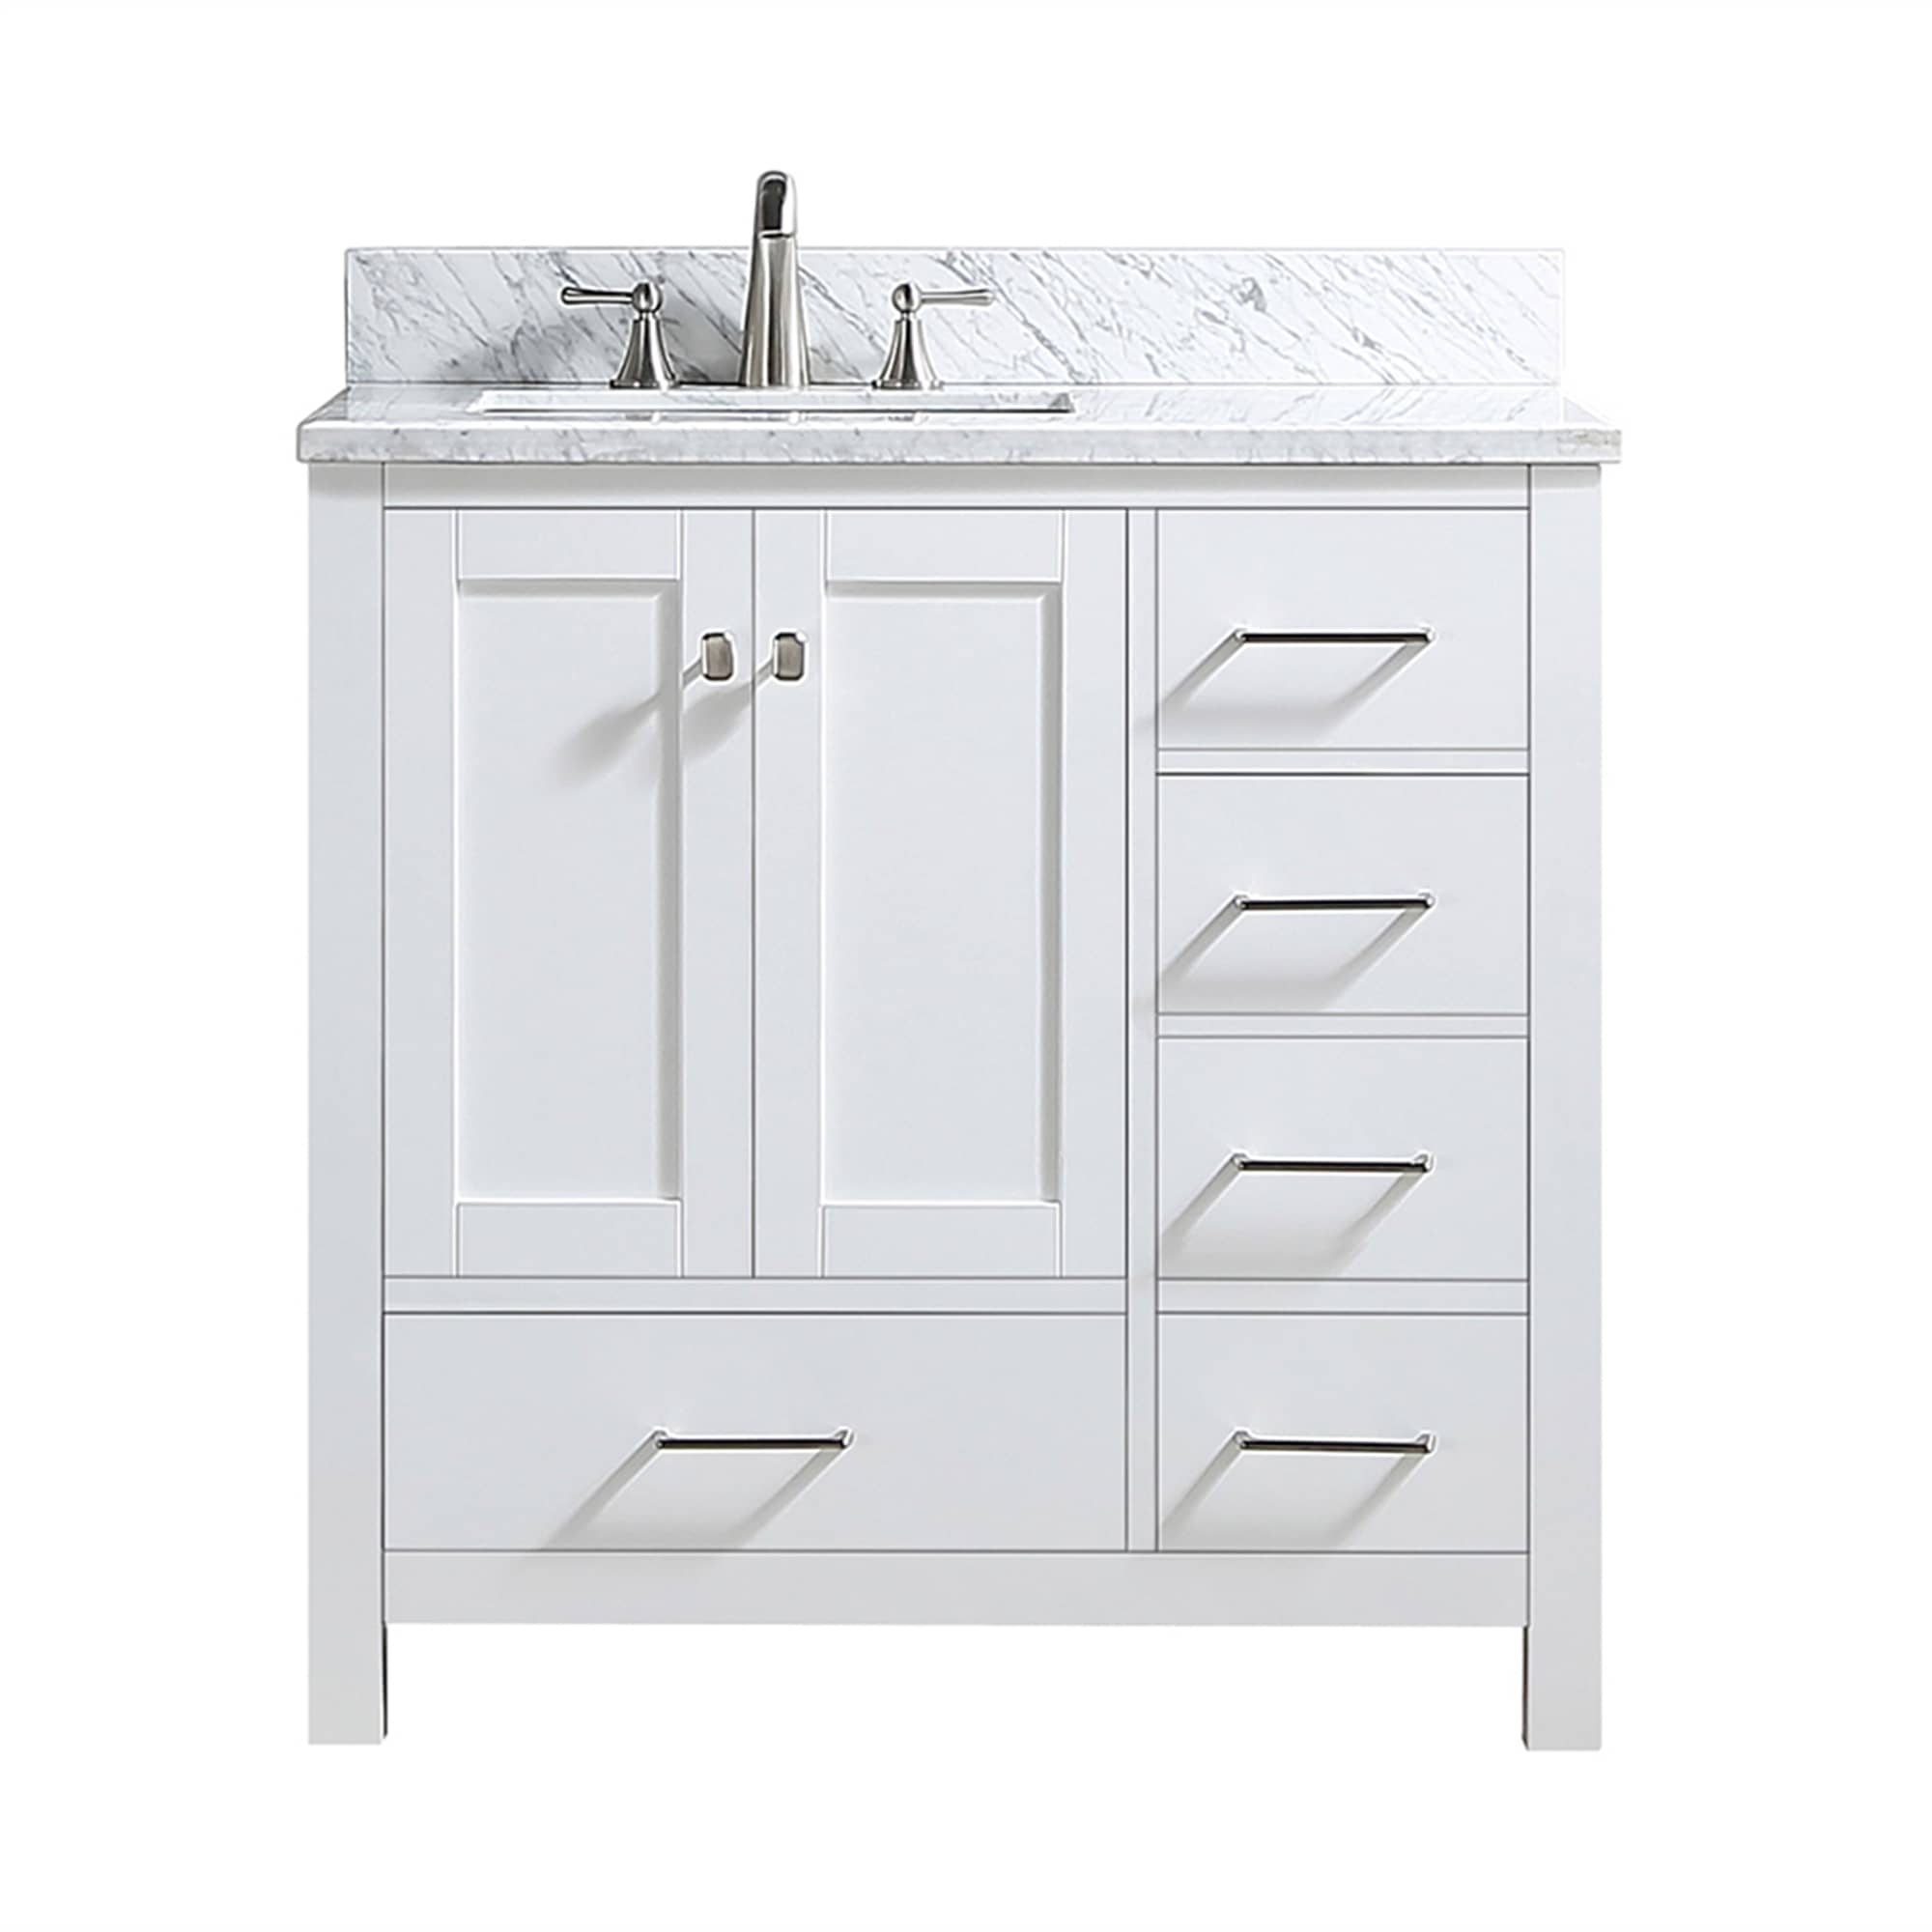 CASAINC 36 Inch Bath Vanity in White with White Top and Basin ( 36W x 22D x 35.4 "H )